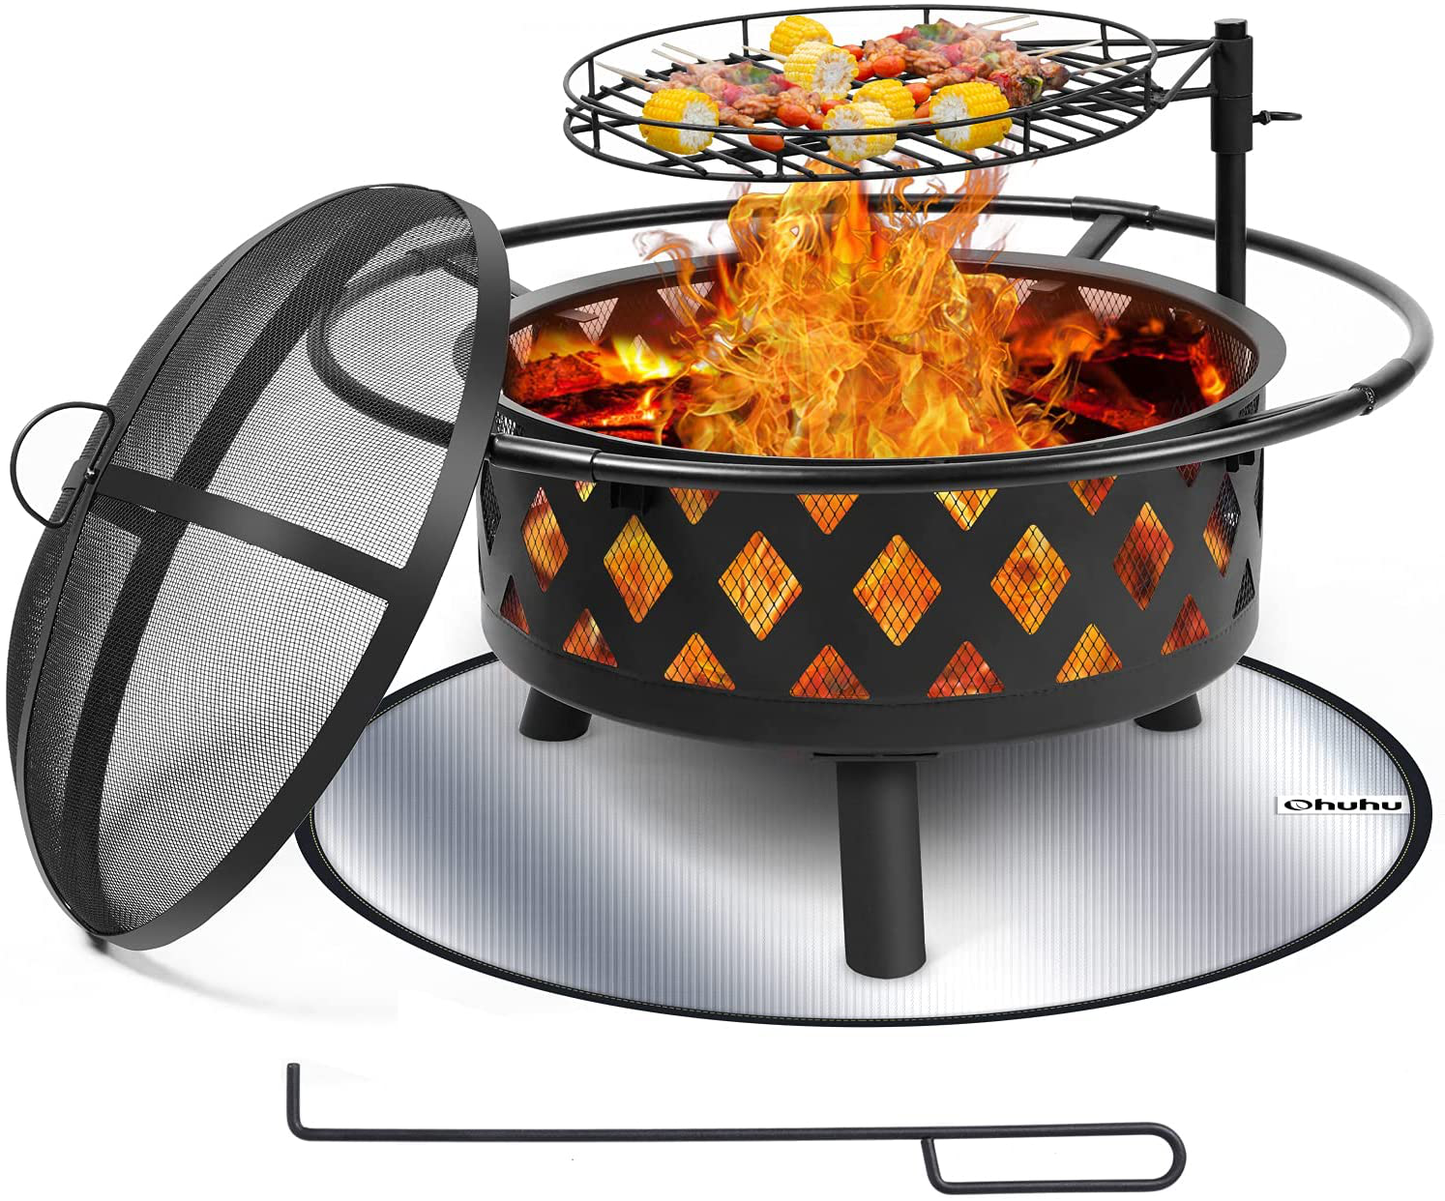 30 Inch Large Fire Pit with Cooking Grate for Outside, Ohuhu 2-in-1 Outdoor Wood Burning Fire Pits with Fireproof Mat, Mesh Lid & Poker, BBQ Grill Firepit for Patio Backyard Garden Camping Bonfire